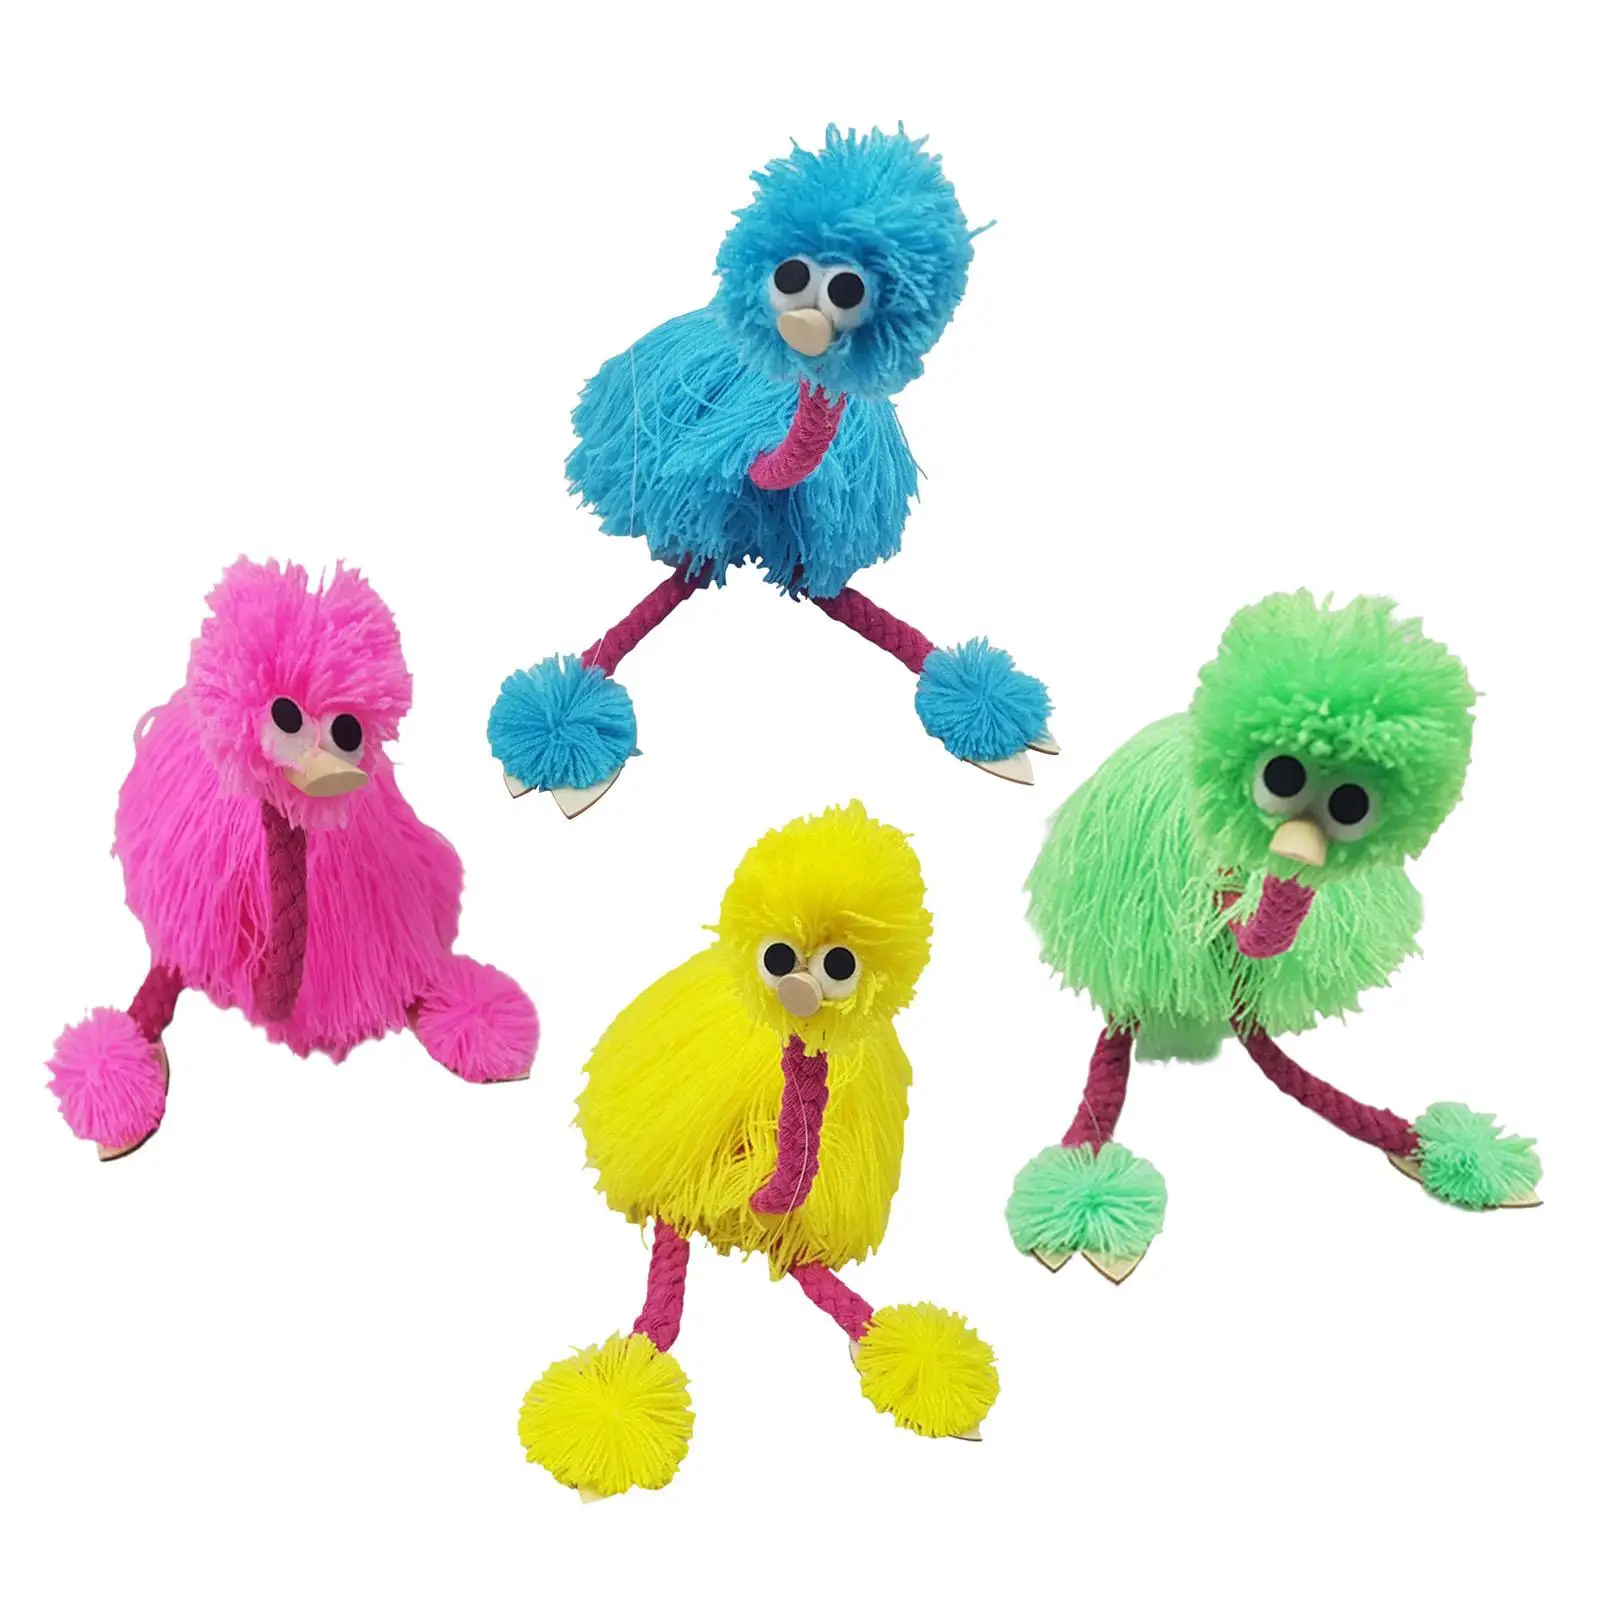 Marionette Toy String Puppet Develops Motor Skills Interactive Puppets Dolls